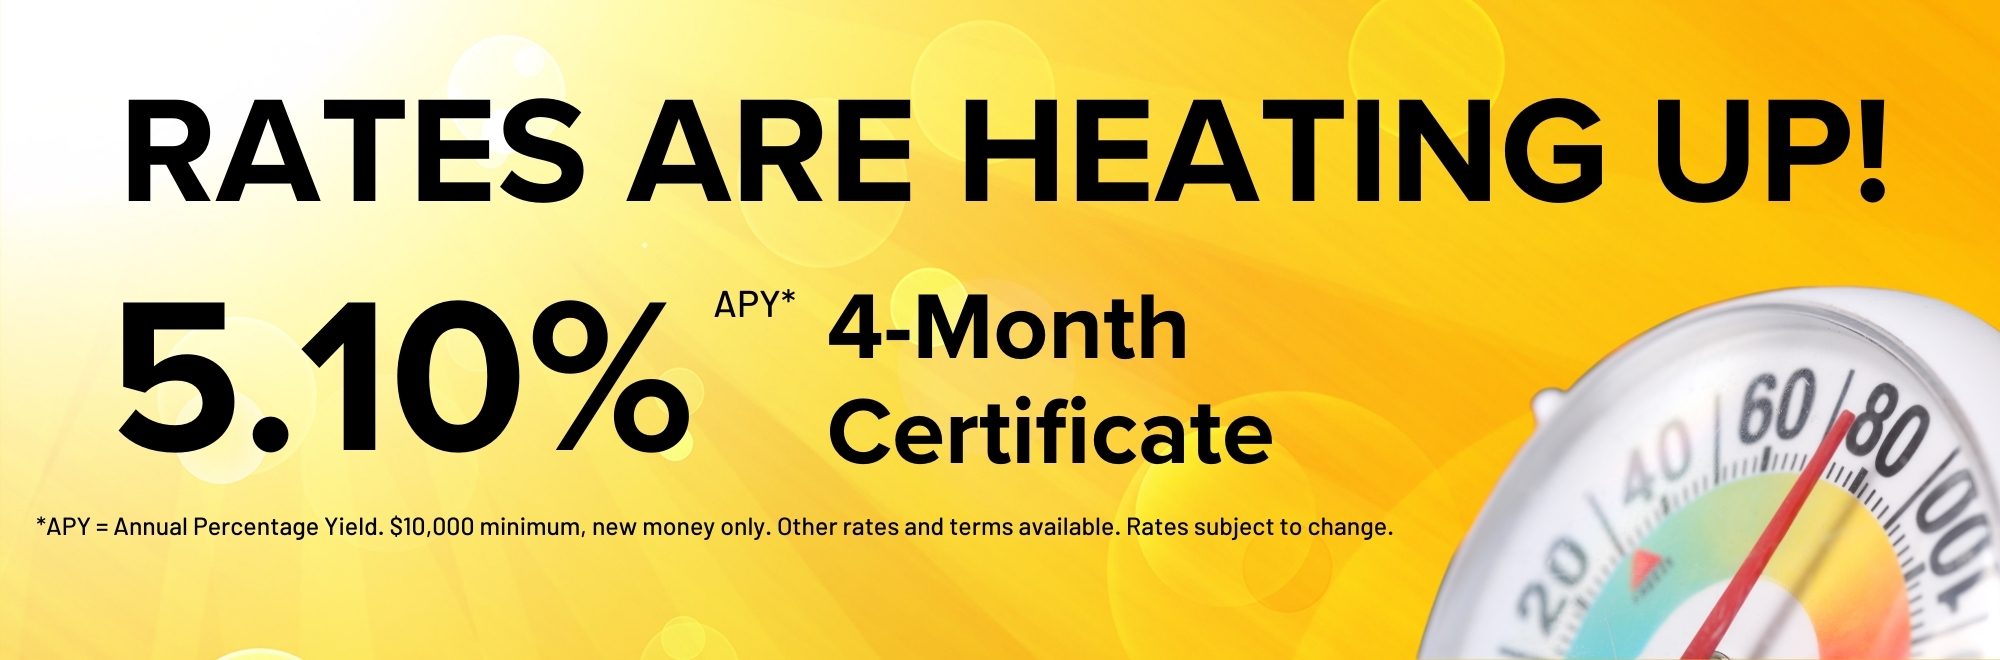 Rates are heating up! Earn 5.10% APY on a 4 month Certificate. $10,000 minimum deposit, new money only.